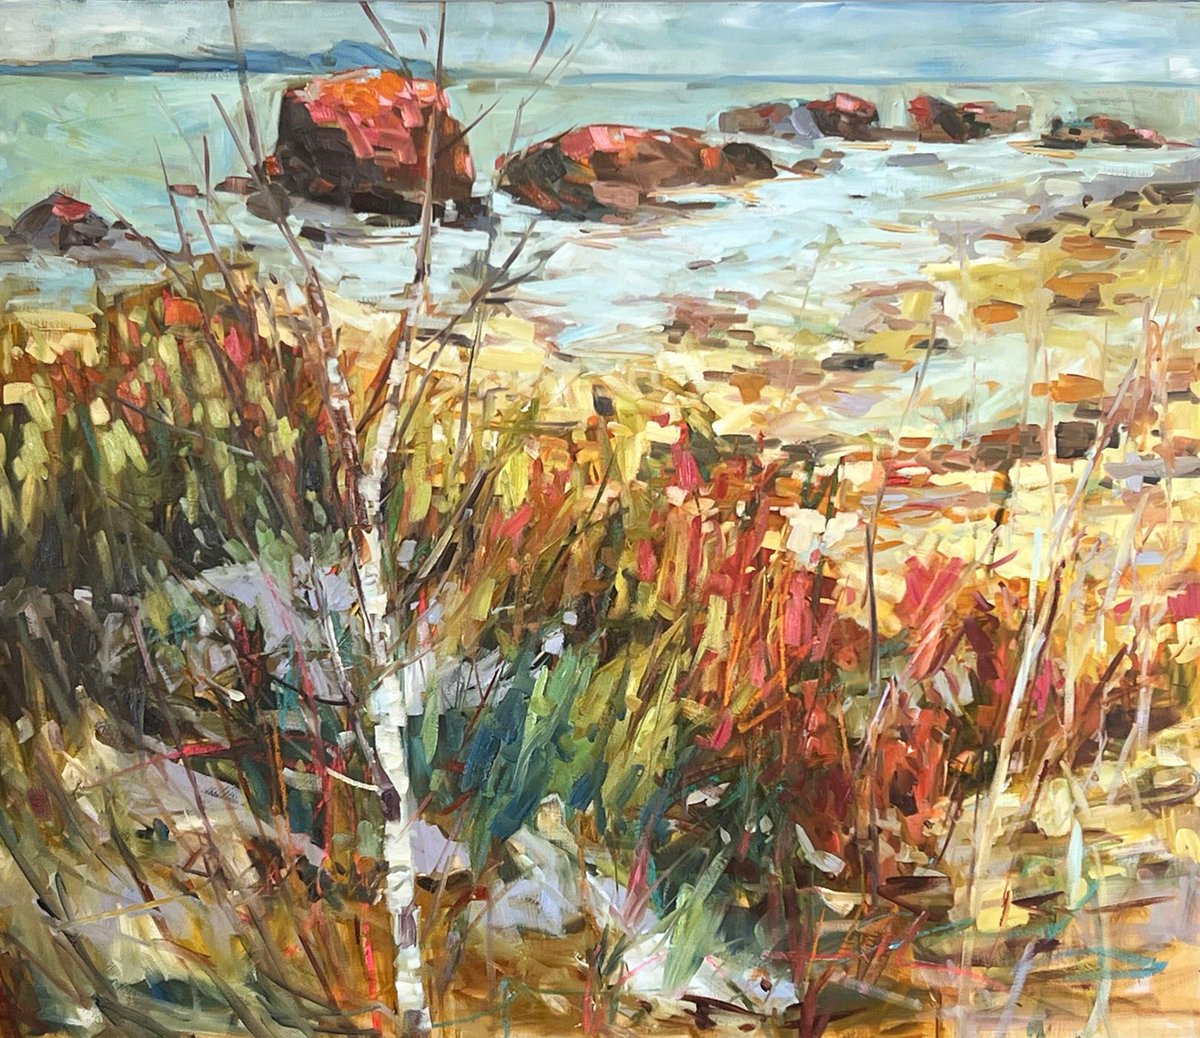 Sheila Davis,     Stepping Stones,     oil on panel,    36' x 42'
.
.
.
#landscape #painting #art #fineart #collector #nature #artcollector #lake #forest #light #canadianartist #torontoartgallery #contemporary #landscapepainting #lake #shore